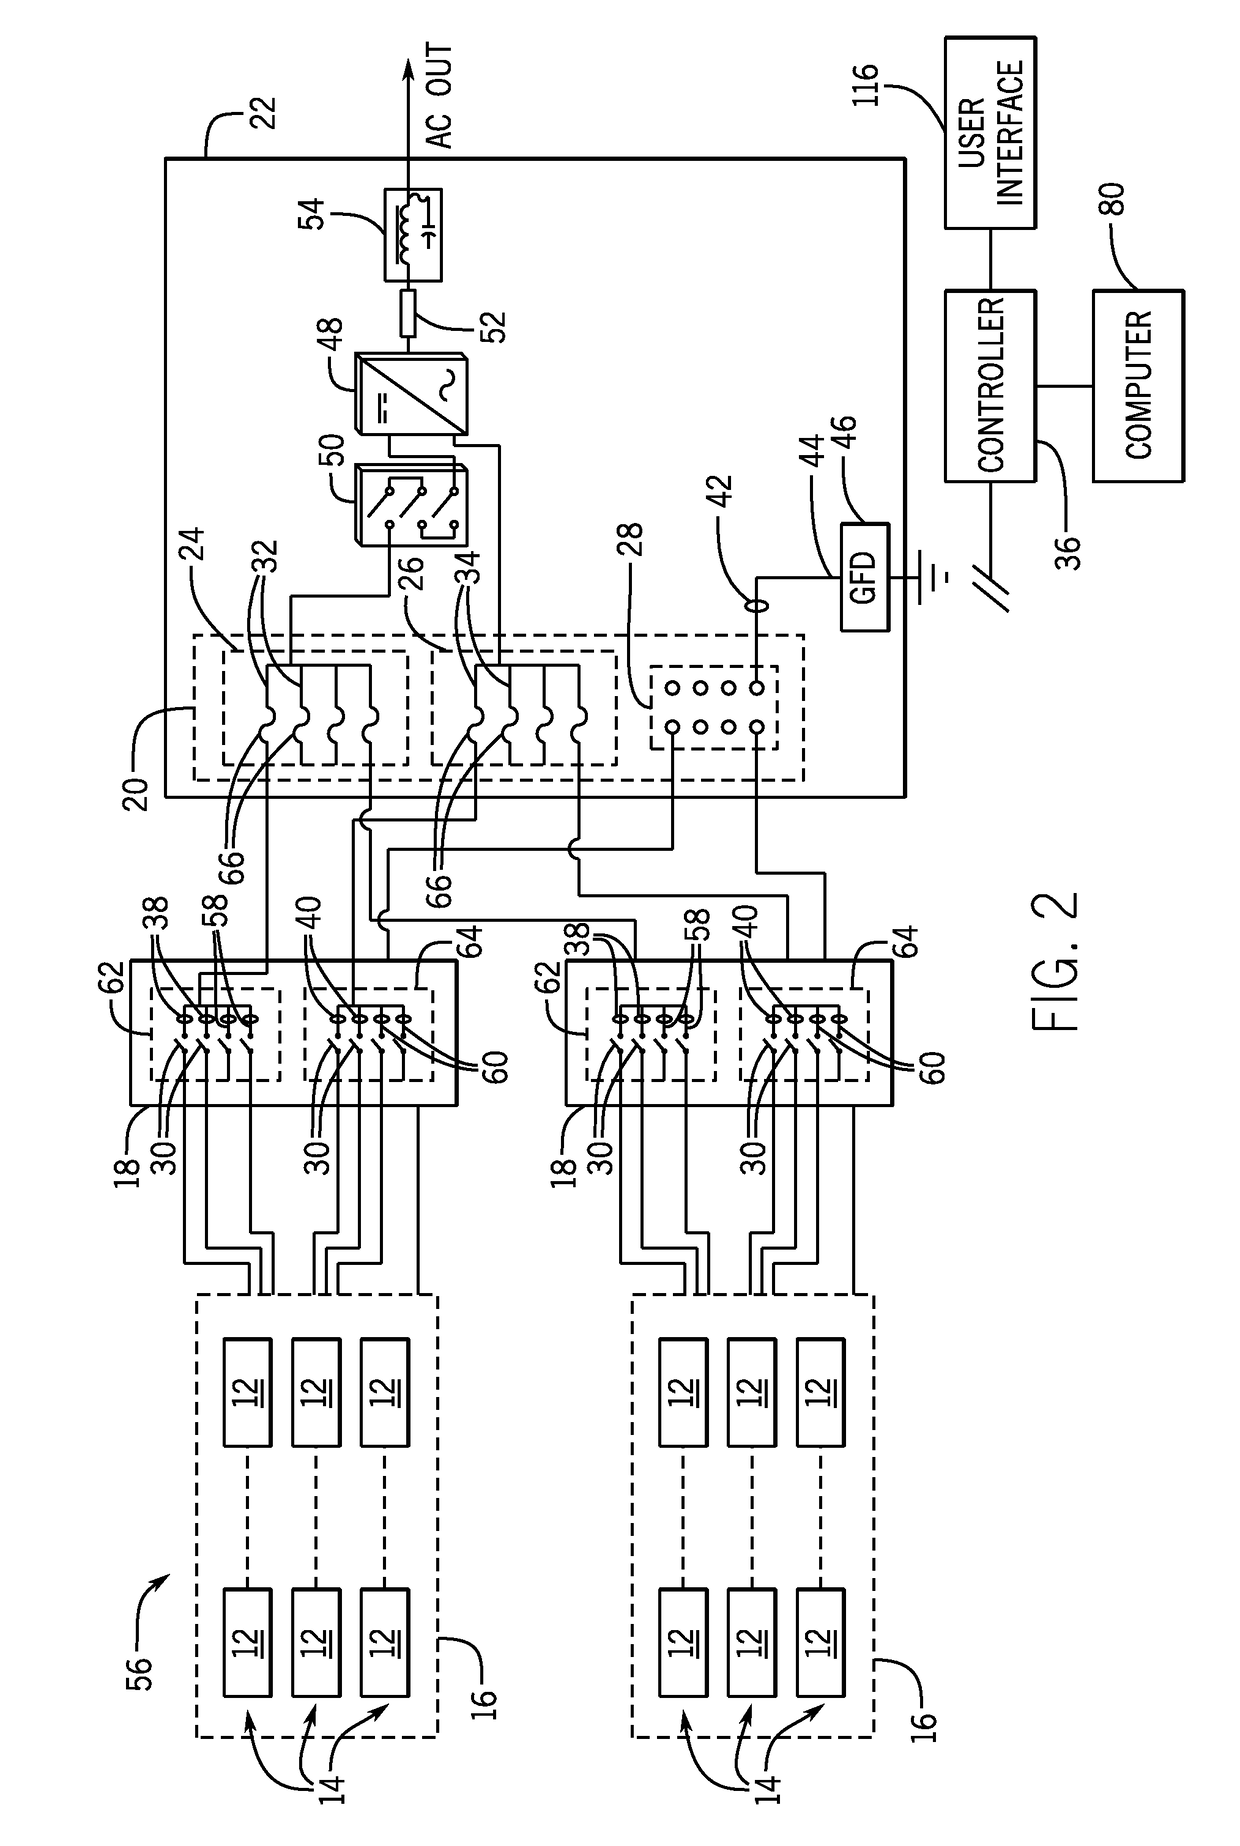 System and method of sensing and isolating a ground fault in a dc-to-ac power conversion system